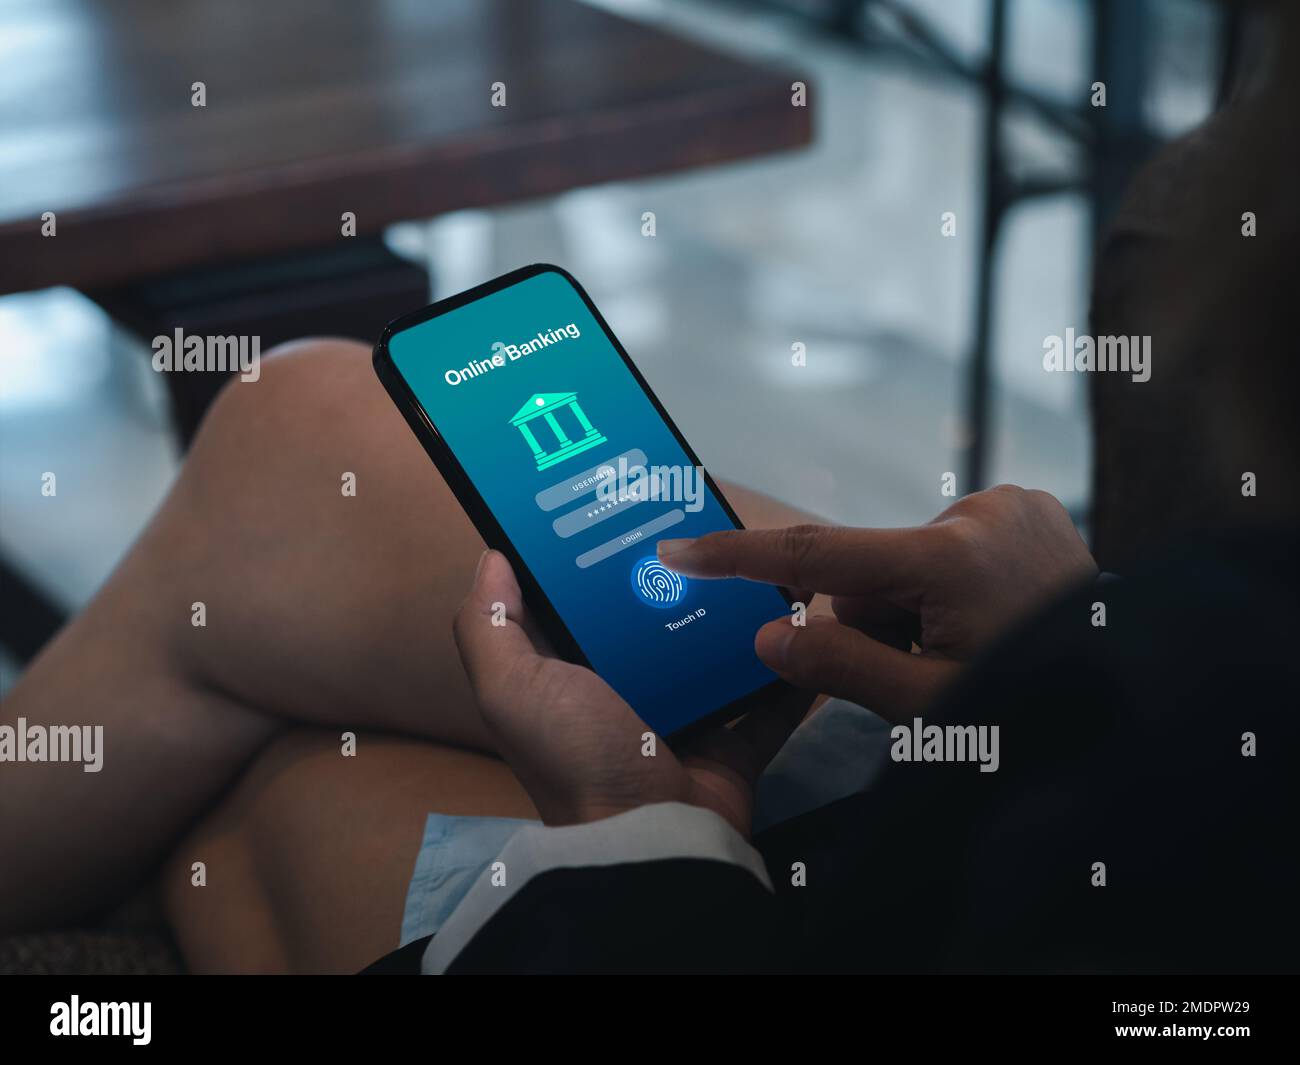 Mobile banking concept. Online banking application page on smart mobile phone screen holding by businessperson hand scanning with fingerprint for logi Stock Photo